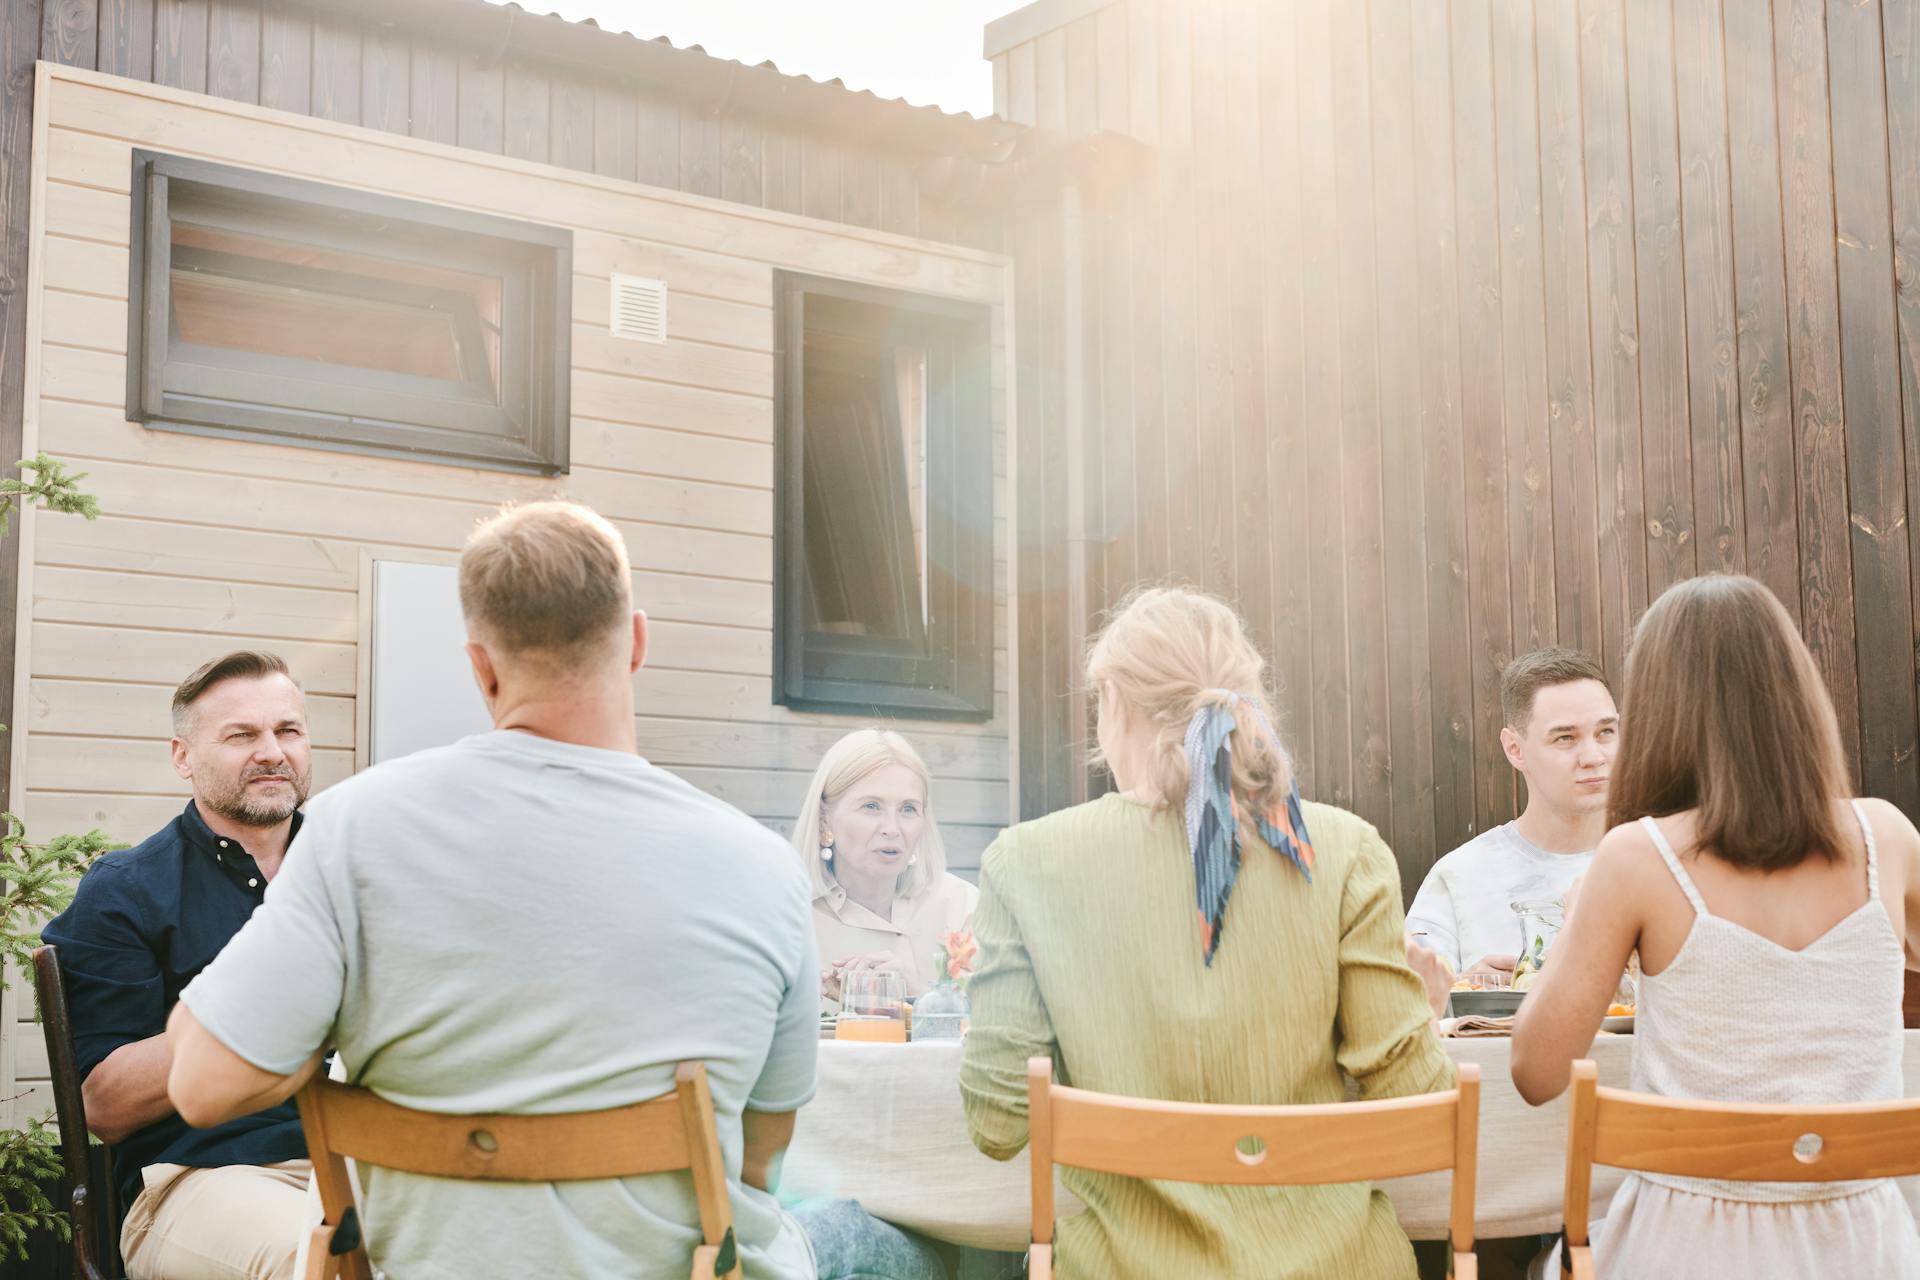 A family dining in their backyard | Source: Pexels